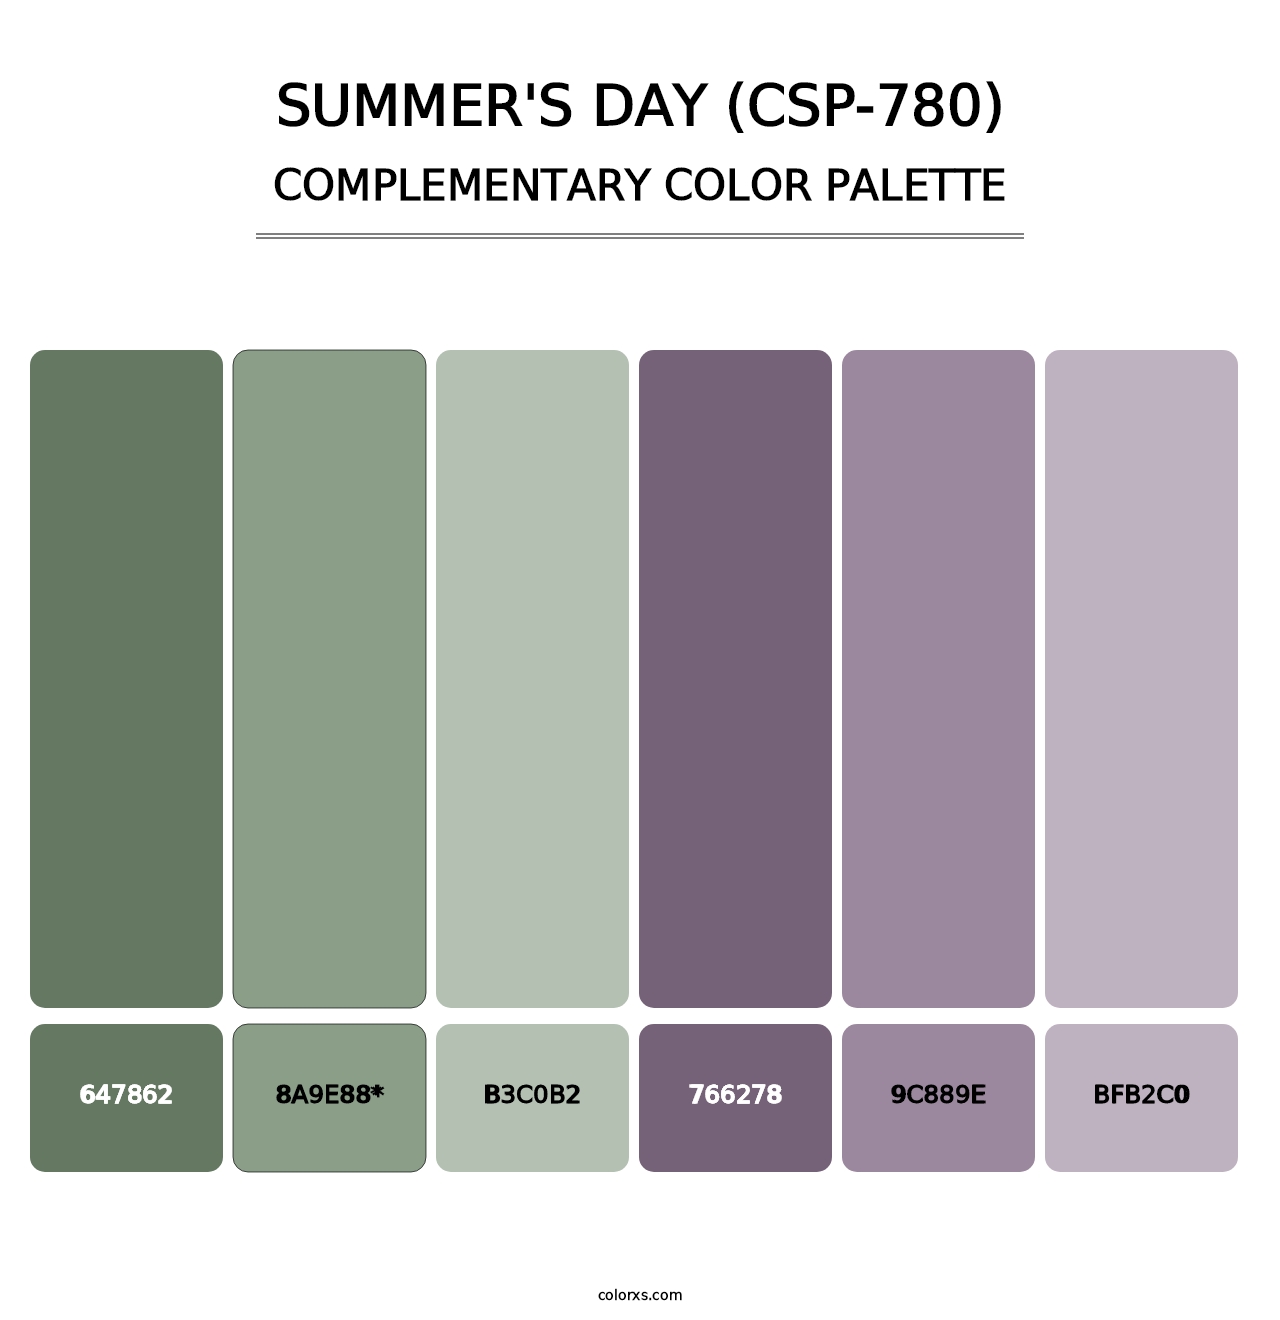 Summer's Day (CSP-780) - Complementary Color Palette